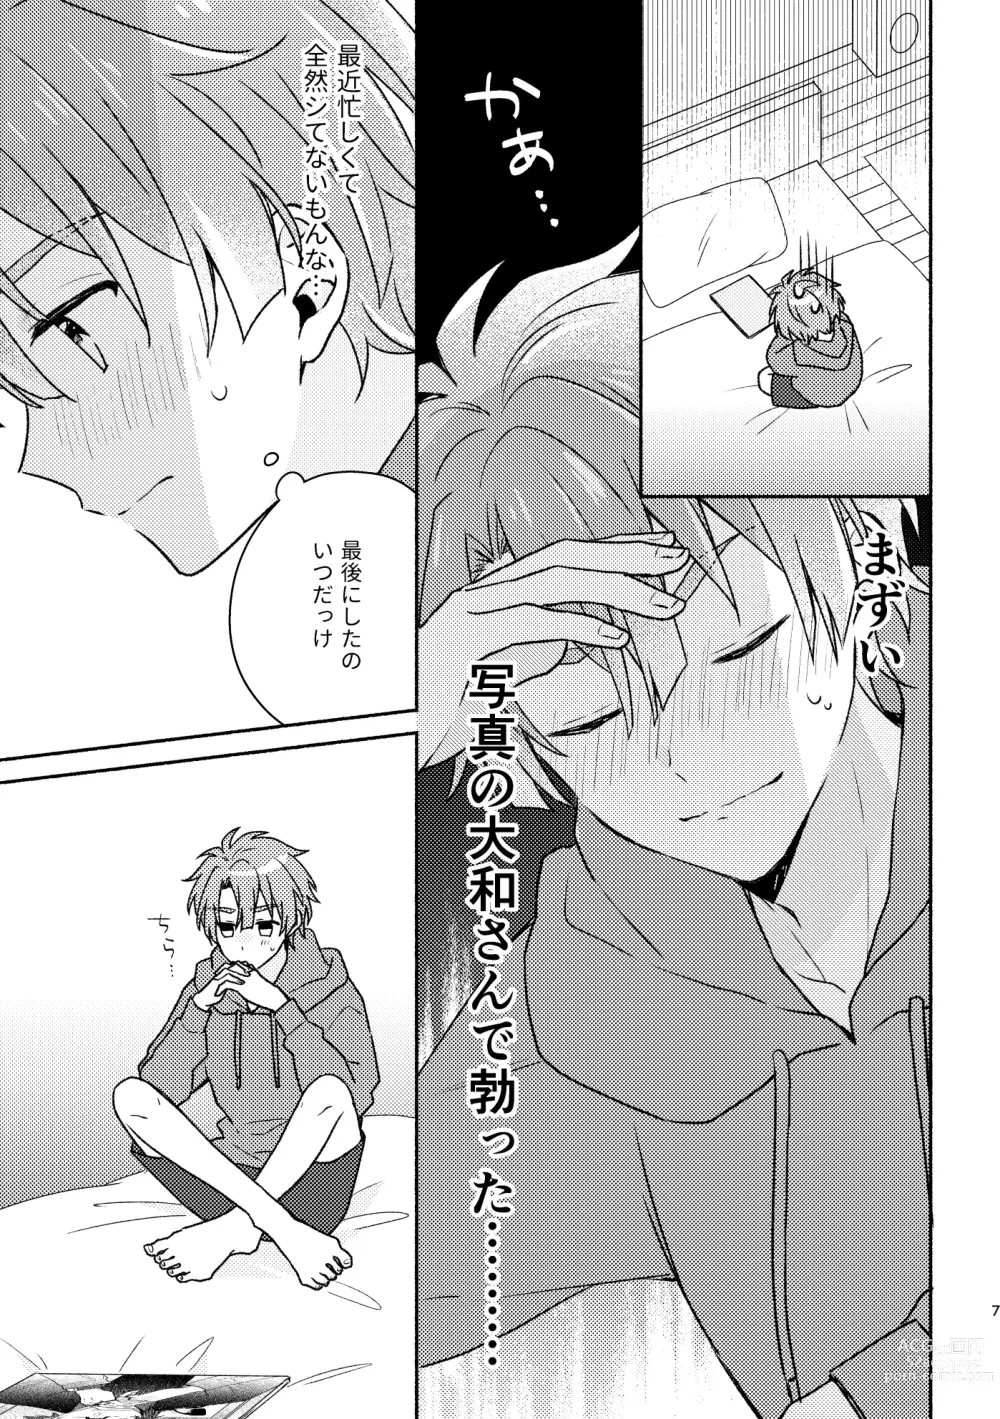 Page 6 of doujinshi Secret Expectations